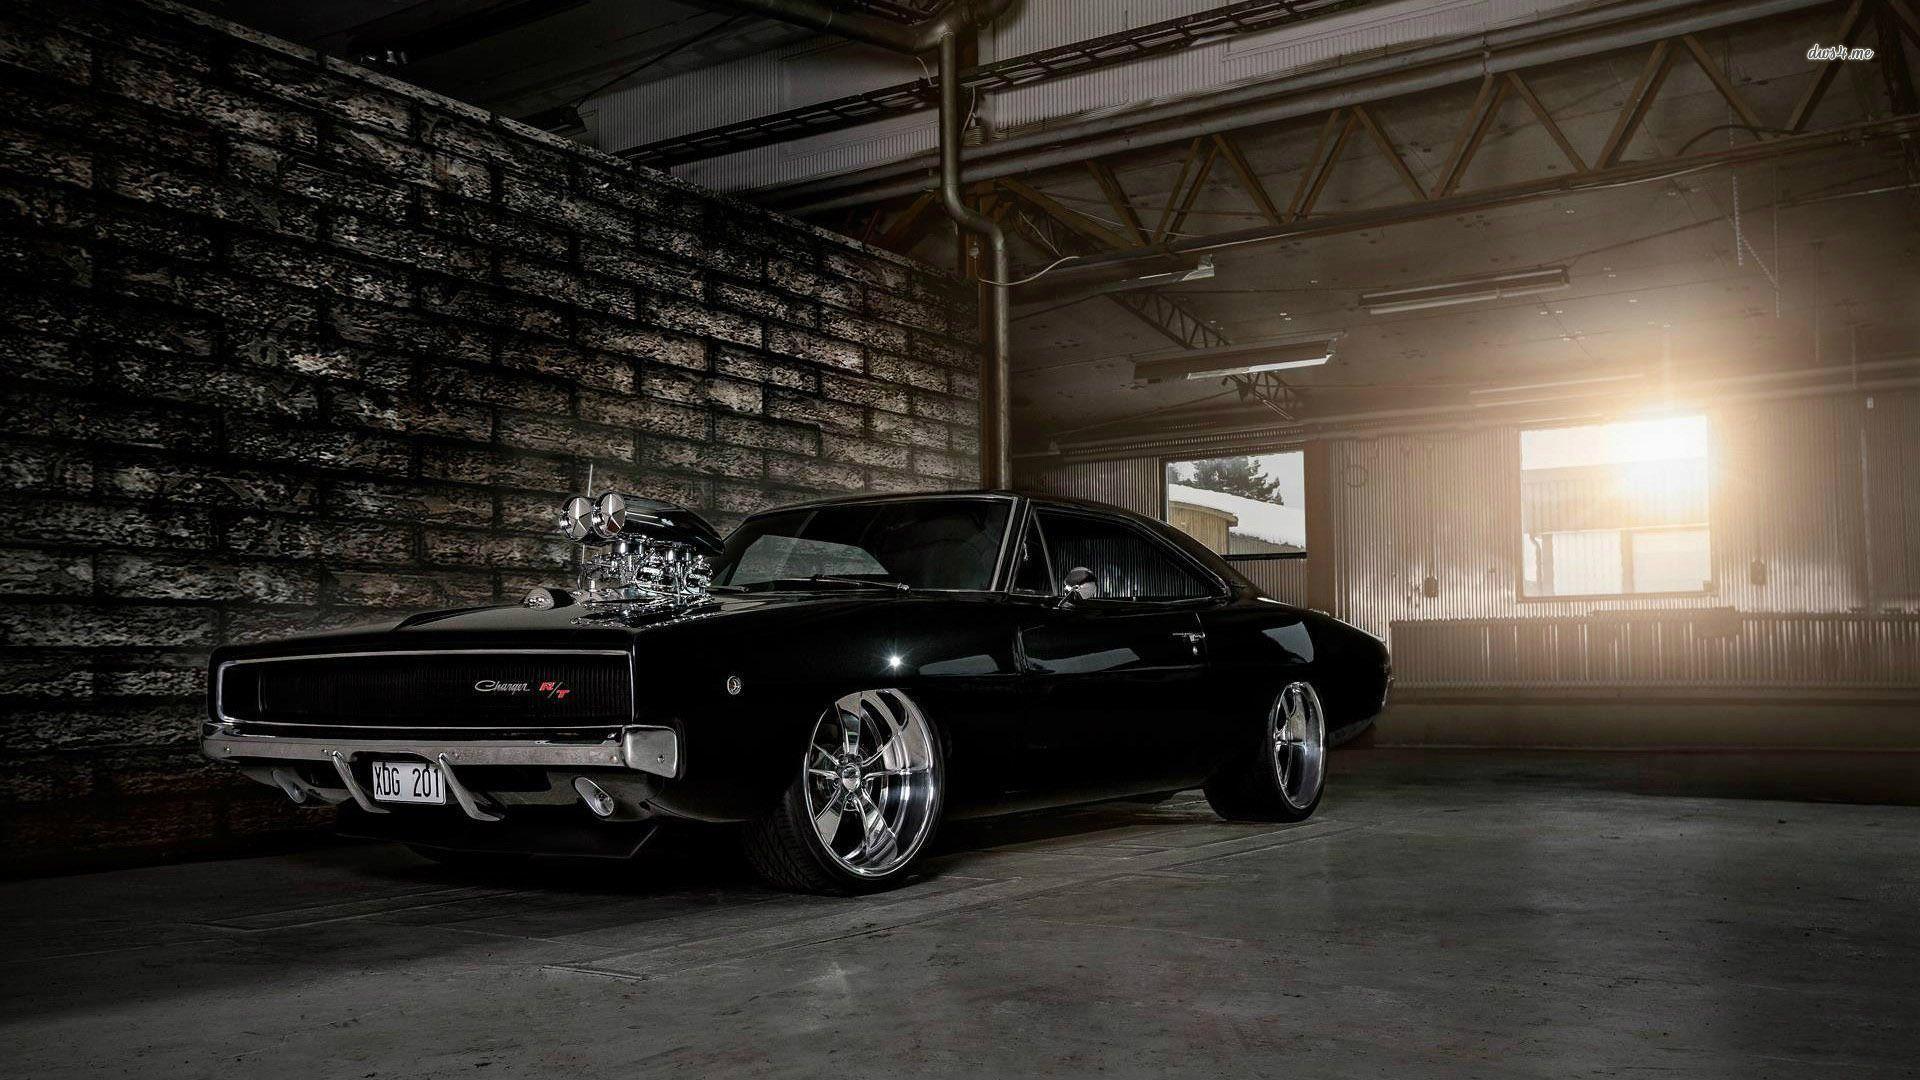 69 Dodge Charger Wallpapers 1920x1080